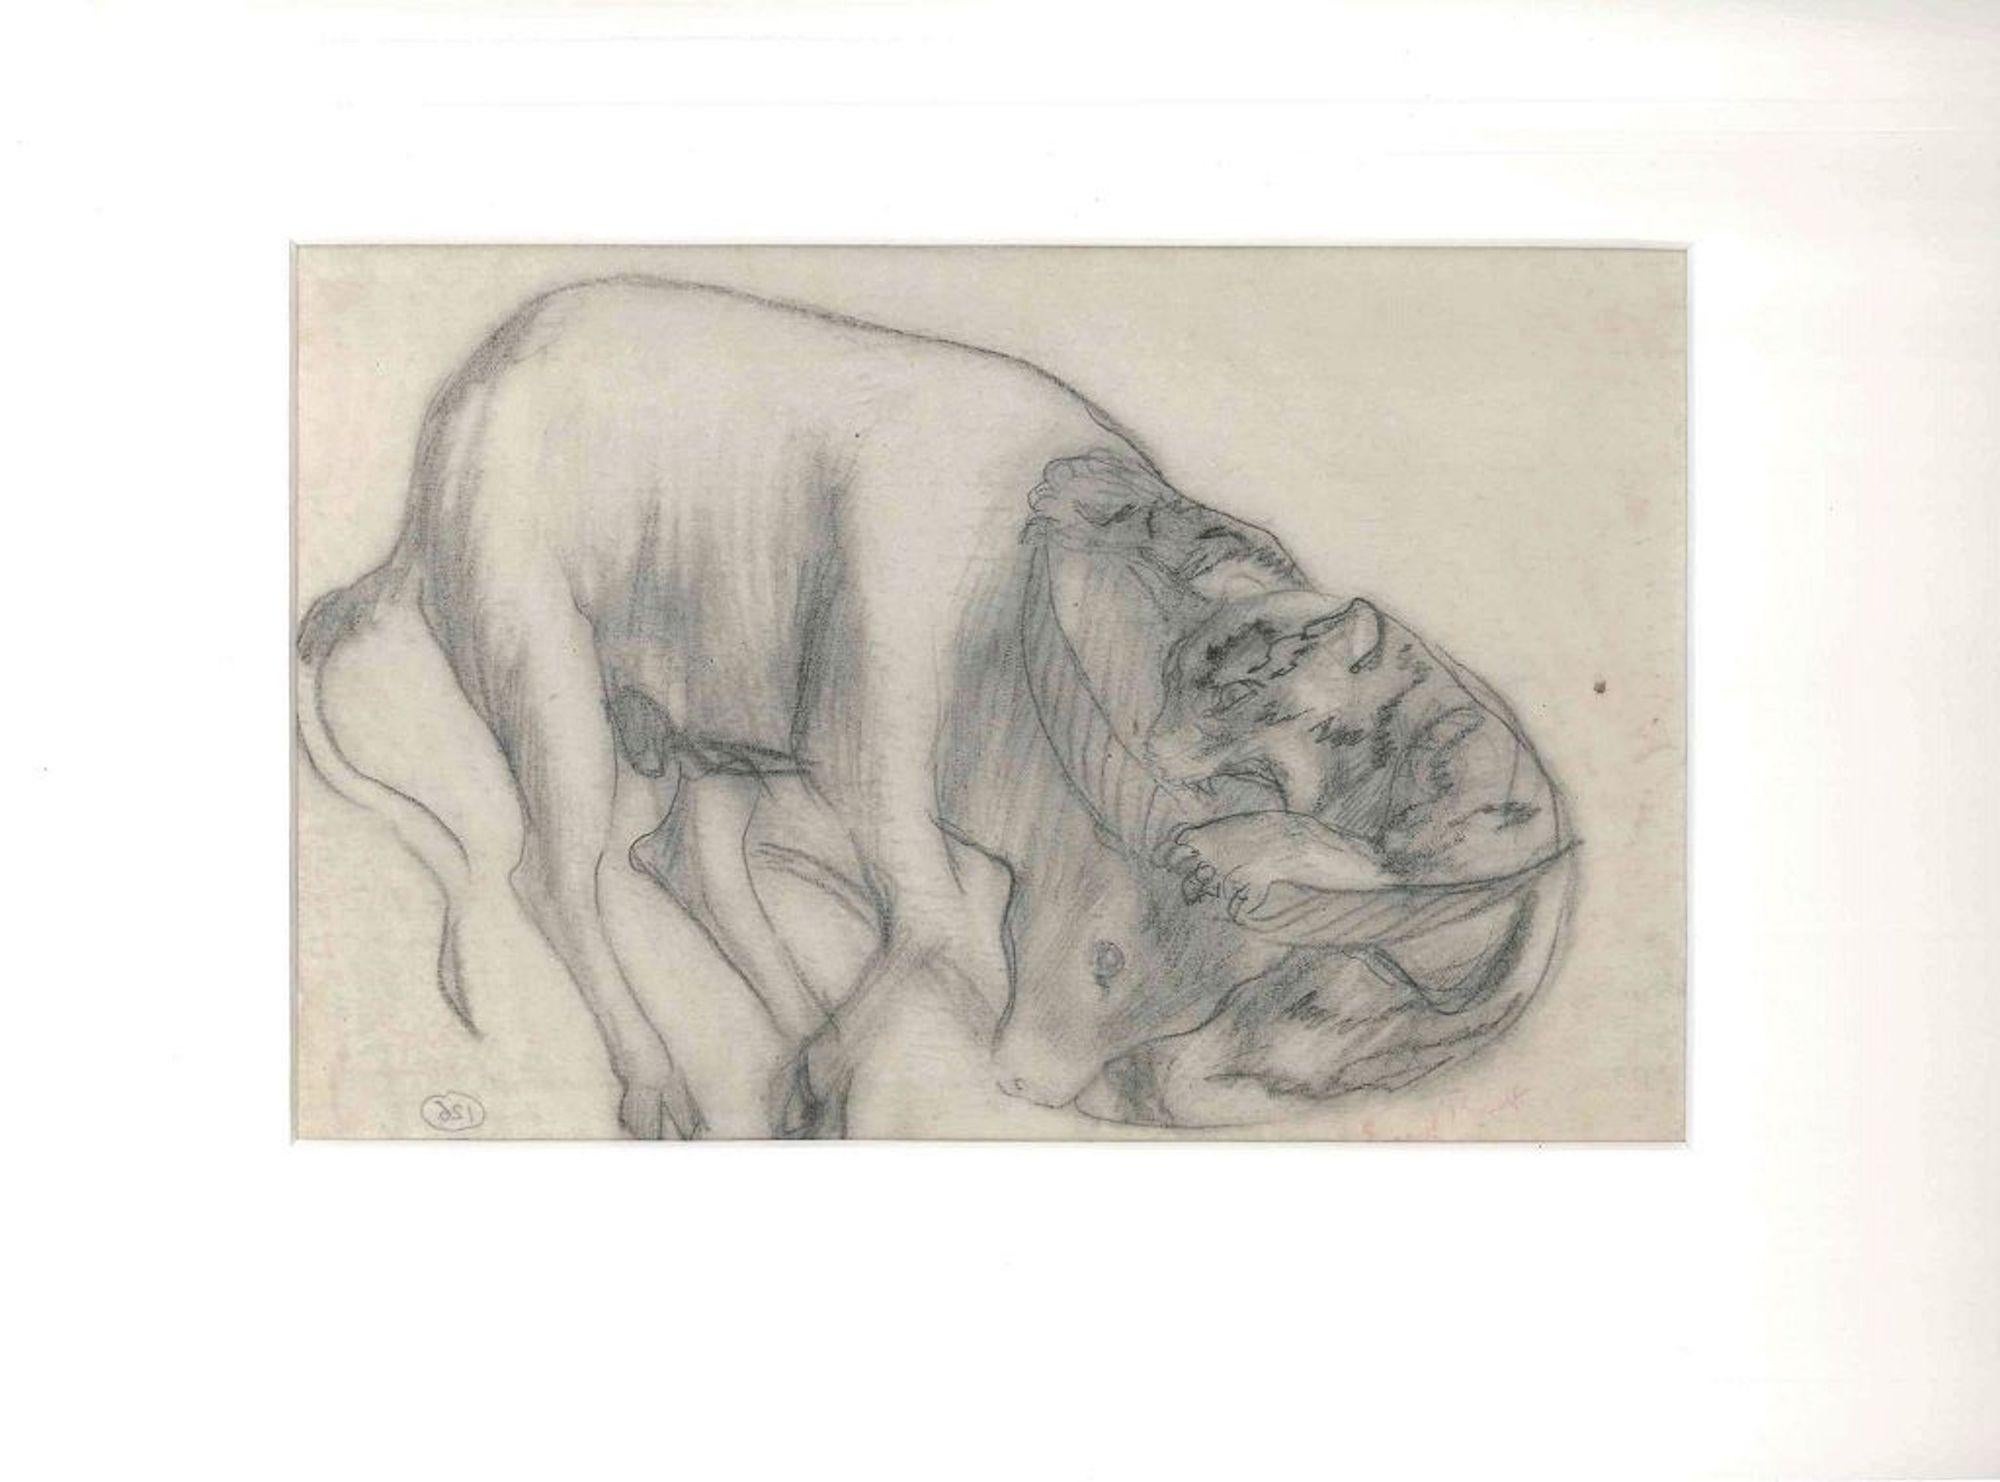 The Feline and the Ox - Original Pencil Drawing by Ernest Rouart - Early 1900